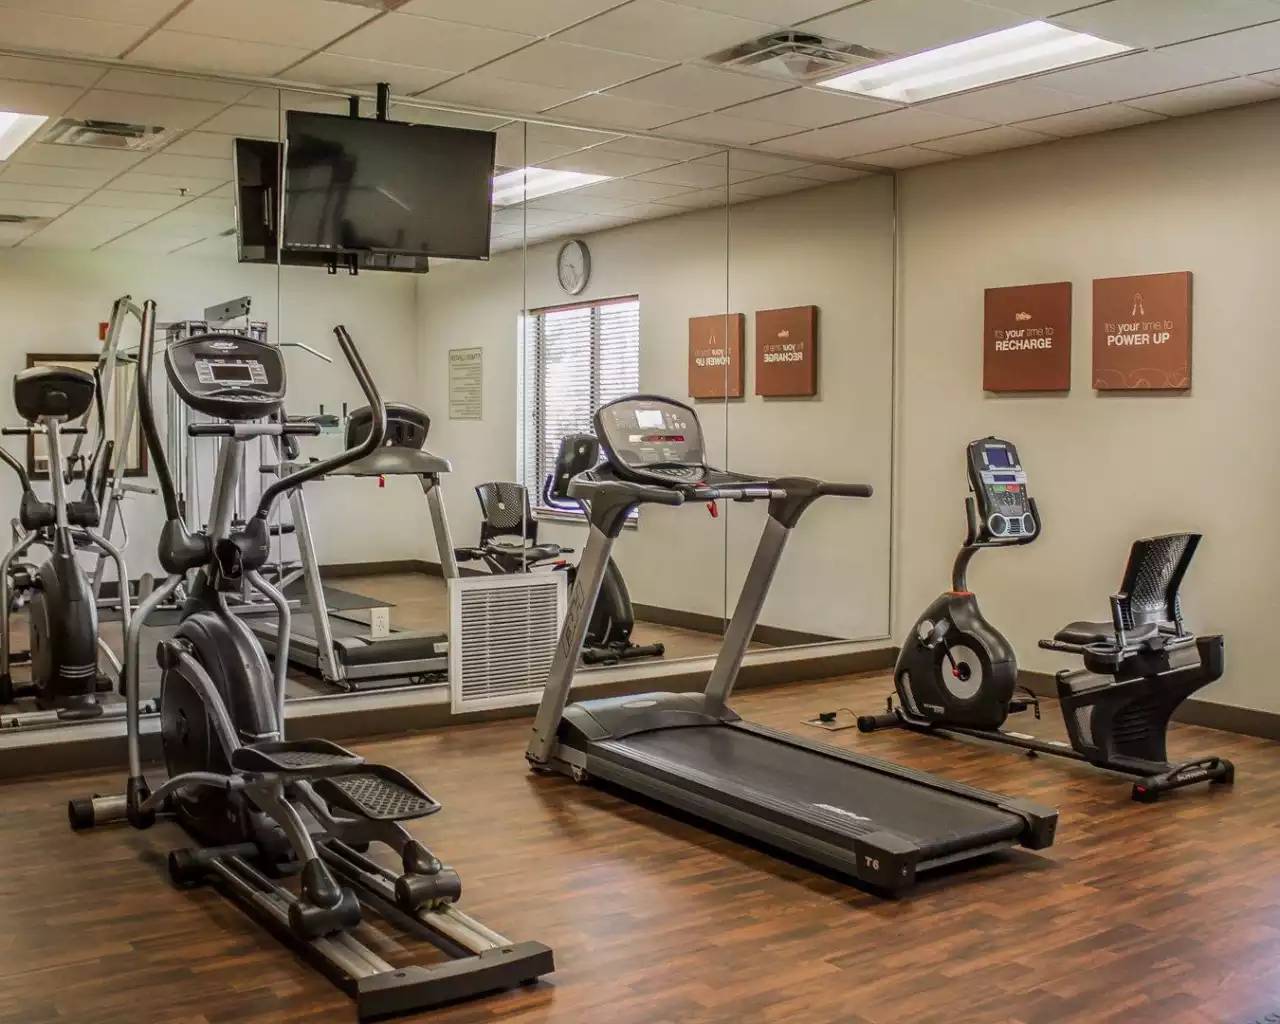 Fitness center with television